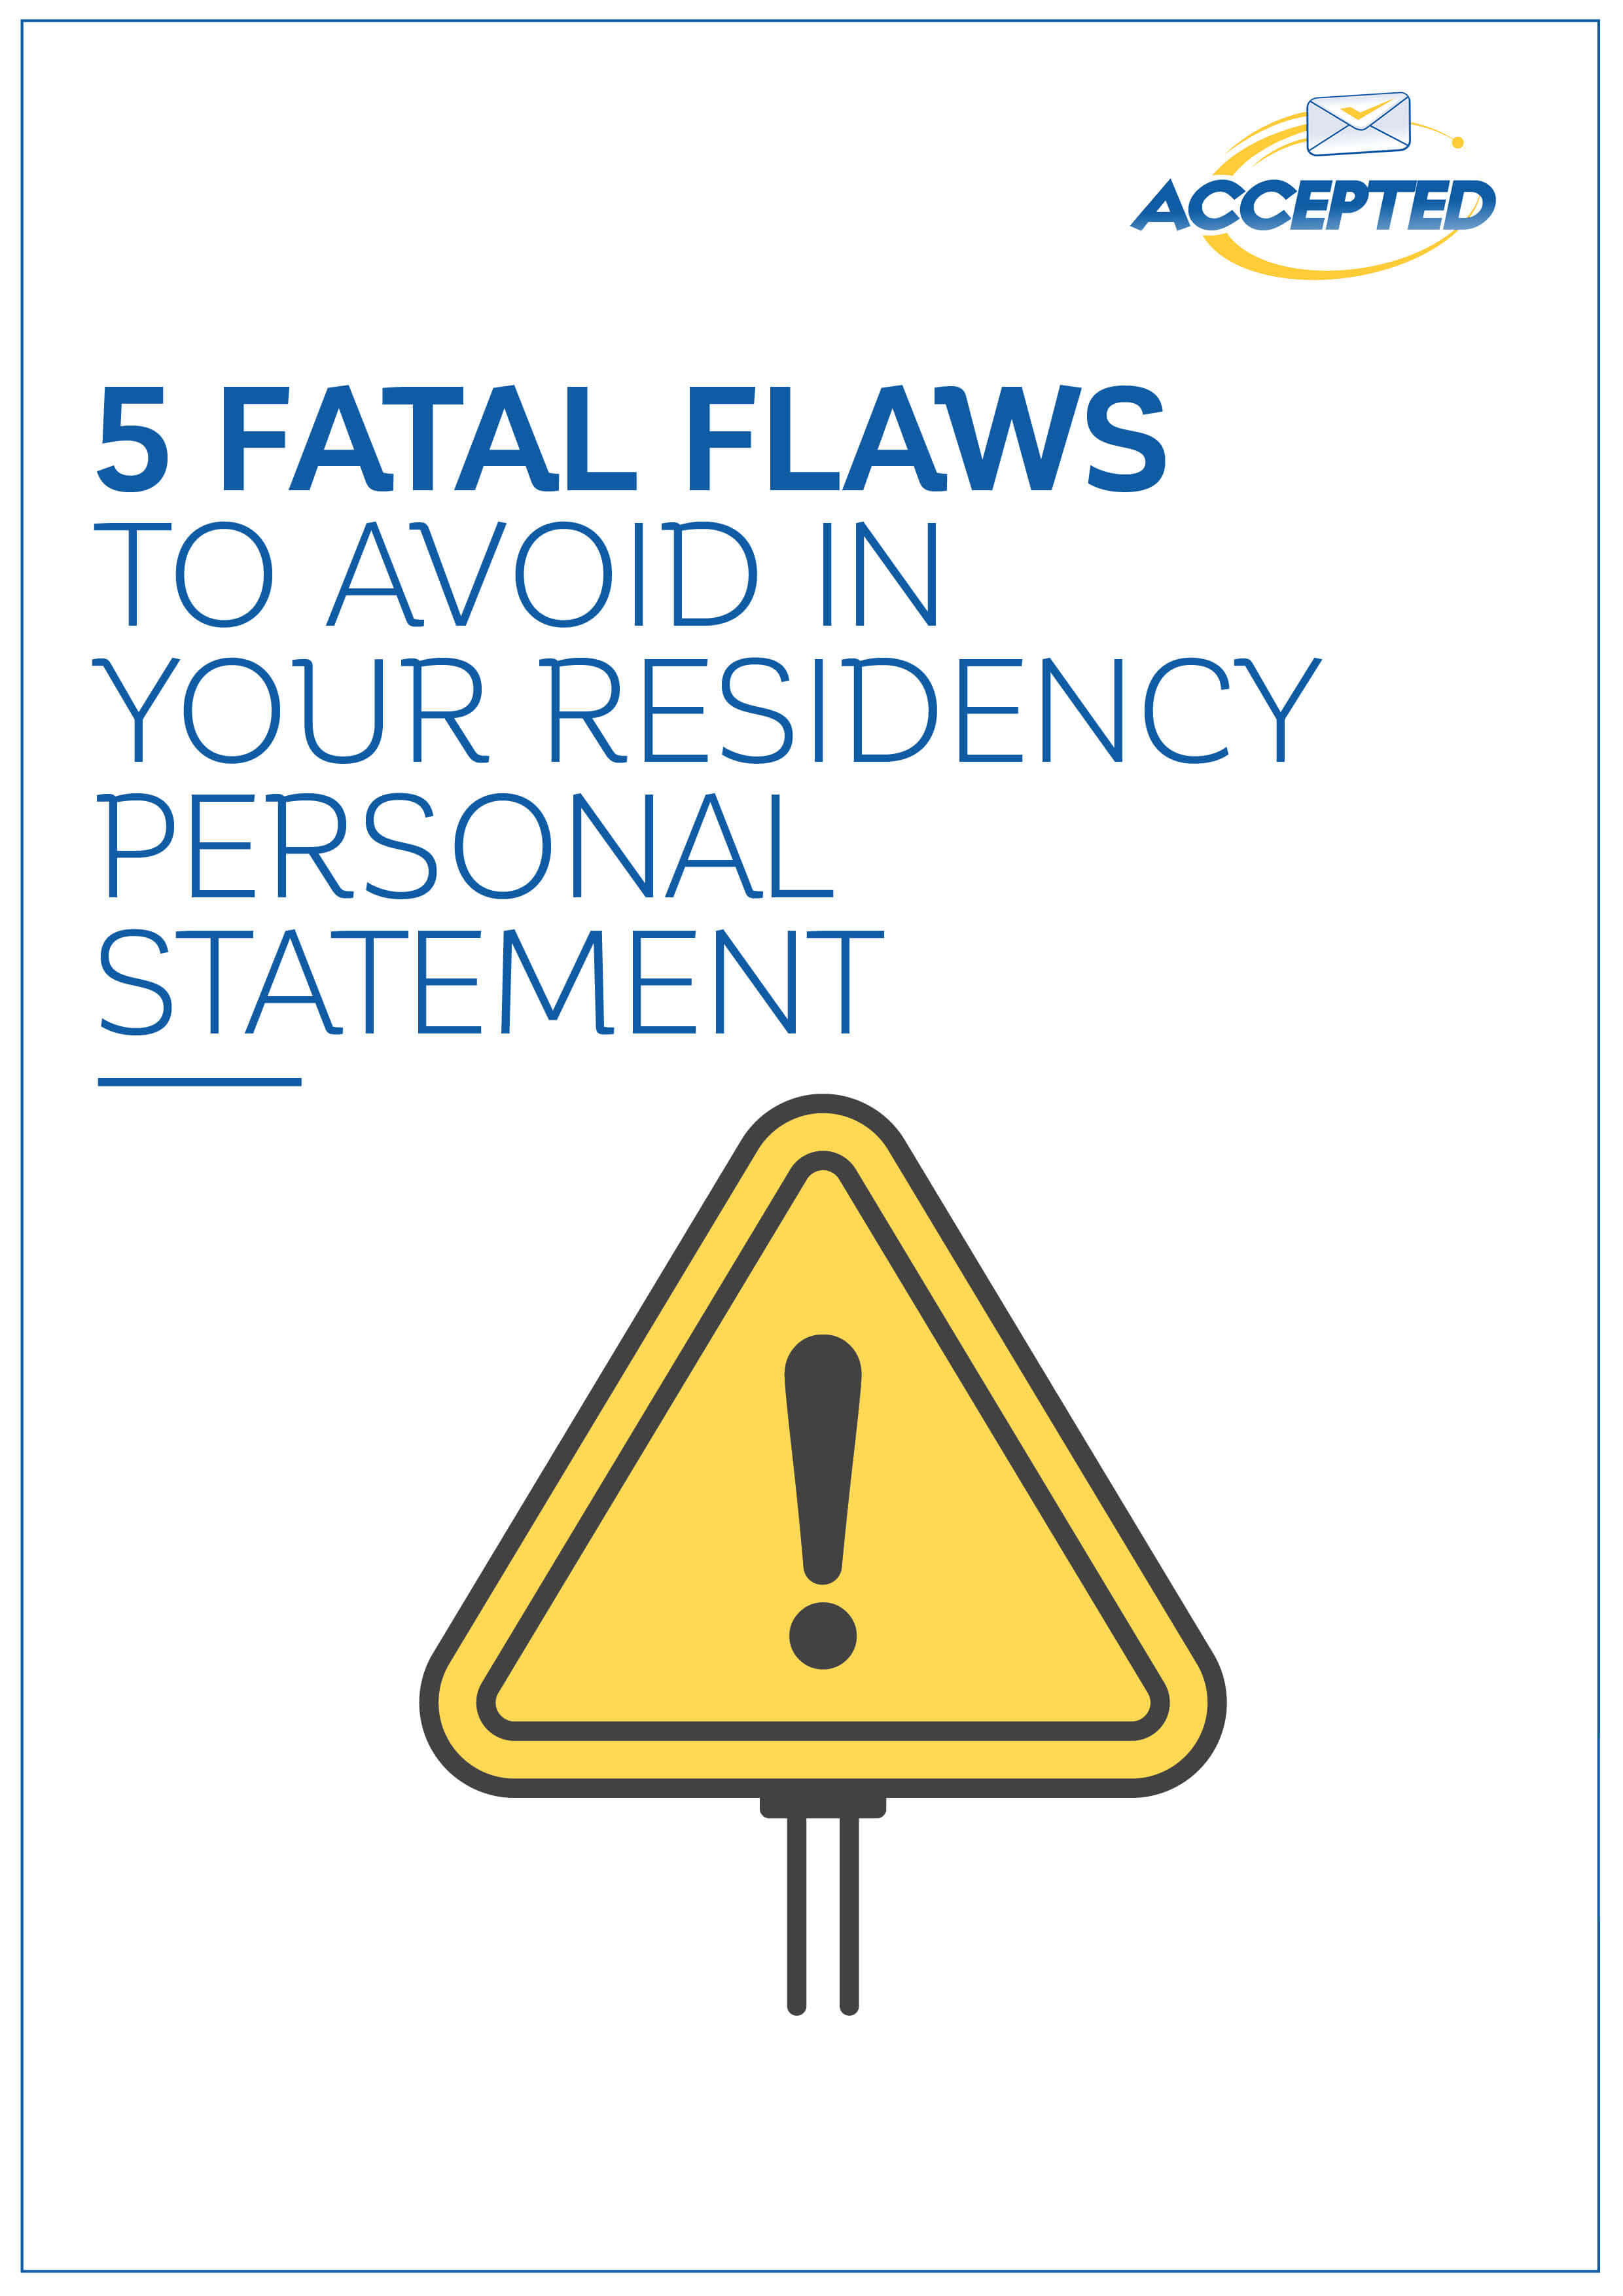 5 Fatal Flaws to Avoid in Your Residency Personal Statement